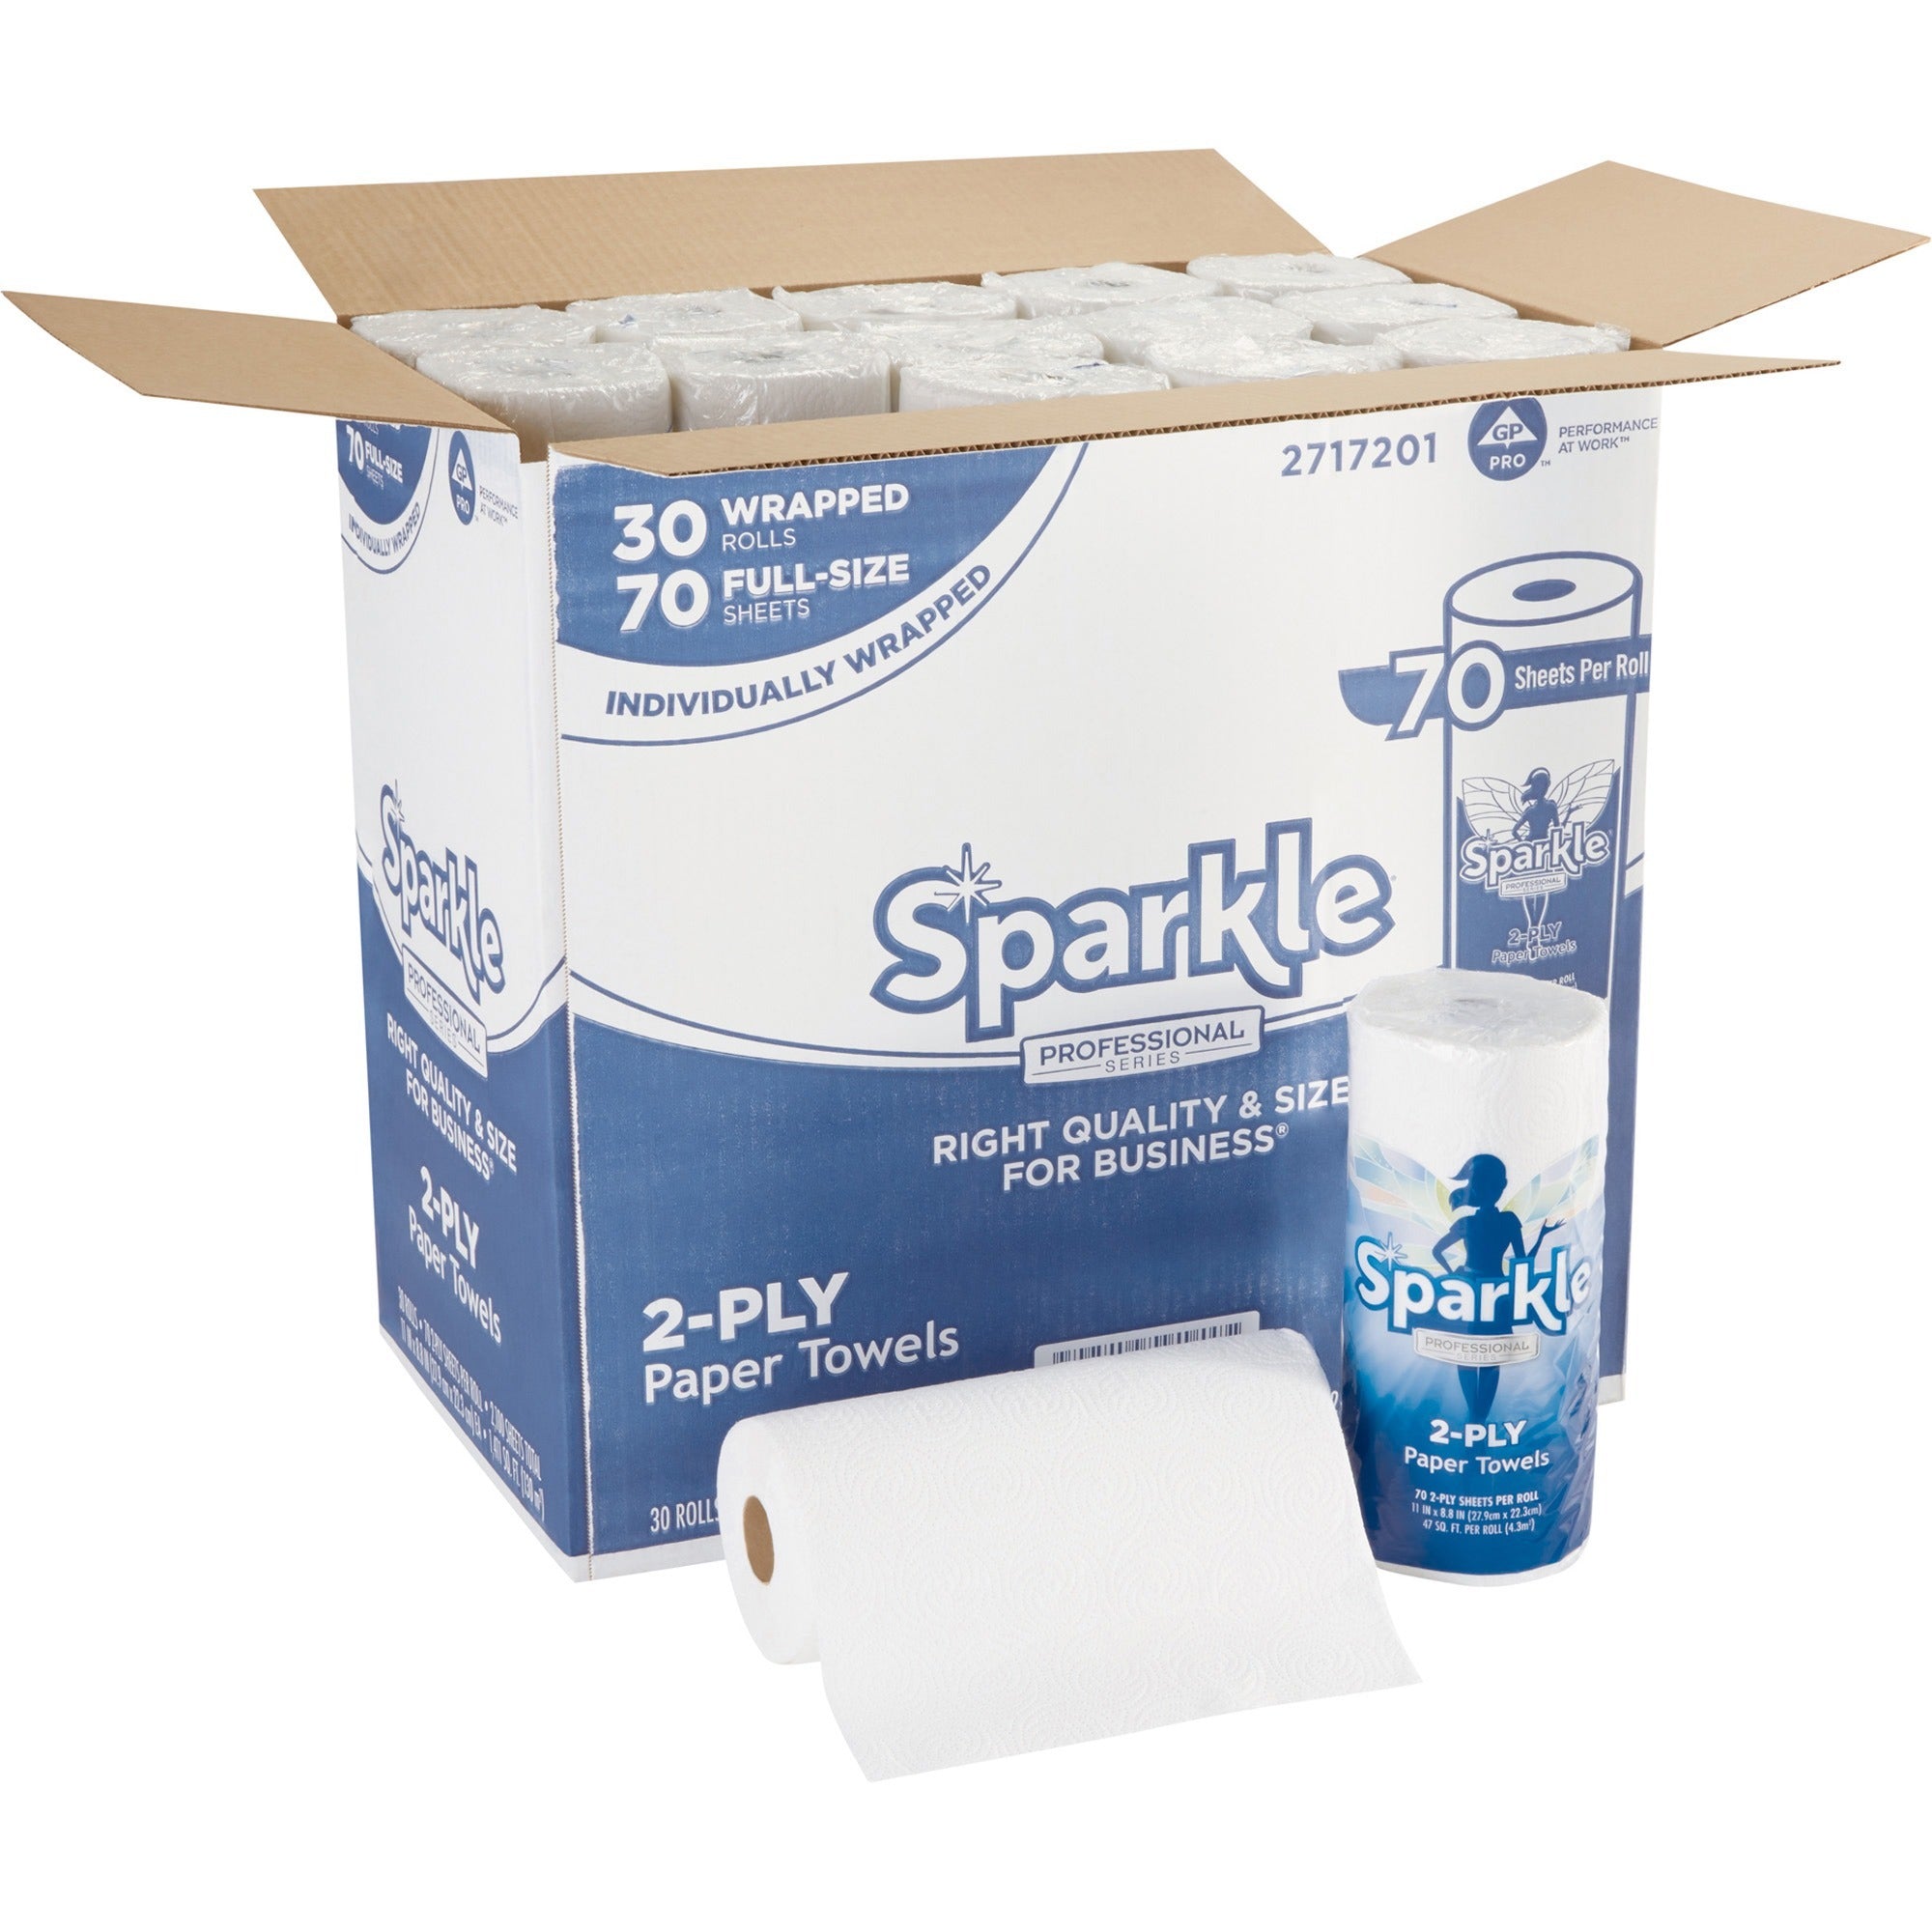 Sparkle Professional Series Paper Towel Rolls by GP Pro - 2 Ply - 8.80" x 11" - 70 Sheets/Roll - White - Paper - Long Lasting, Absorbent, Individually Wrapped, Perforated - For Multipurpose, Hand - 30 / Carton - 